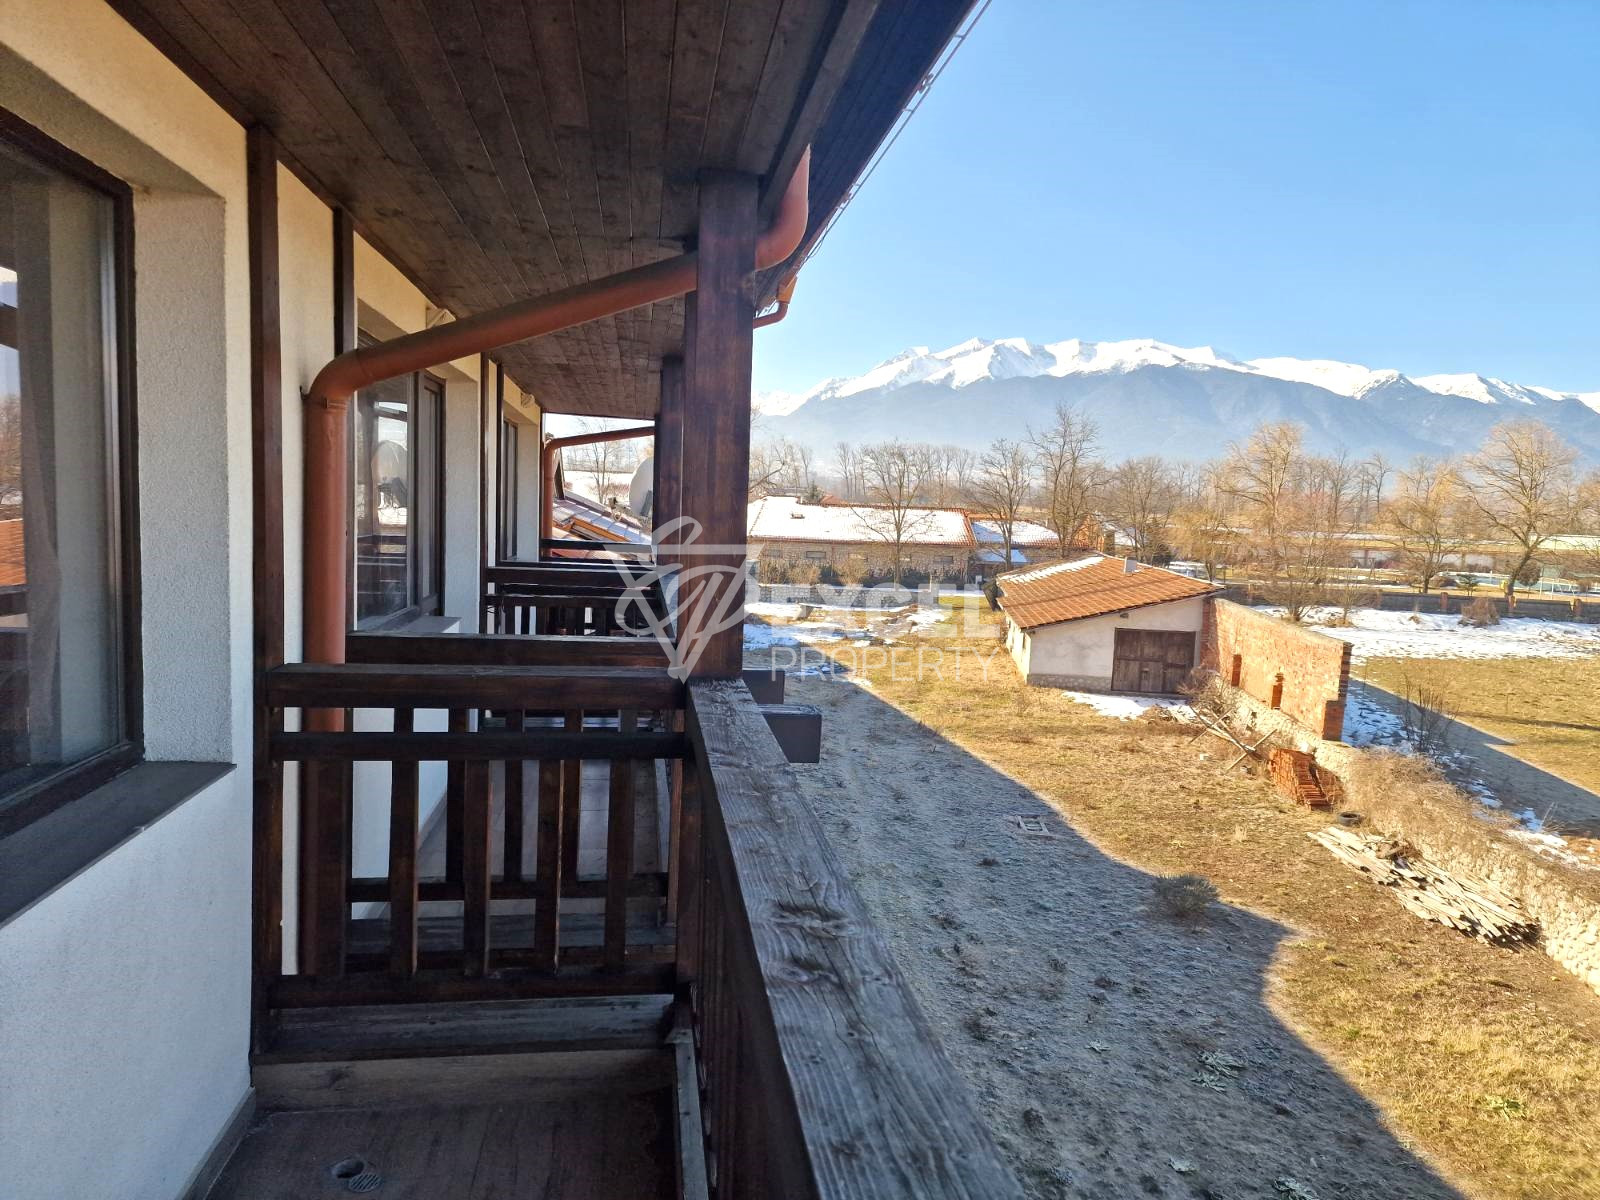 Studio with a beautiful view of Pirin for sale between Bansko and Banya! Low maintenance fee!